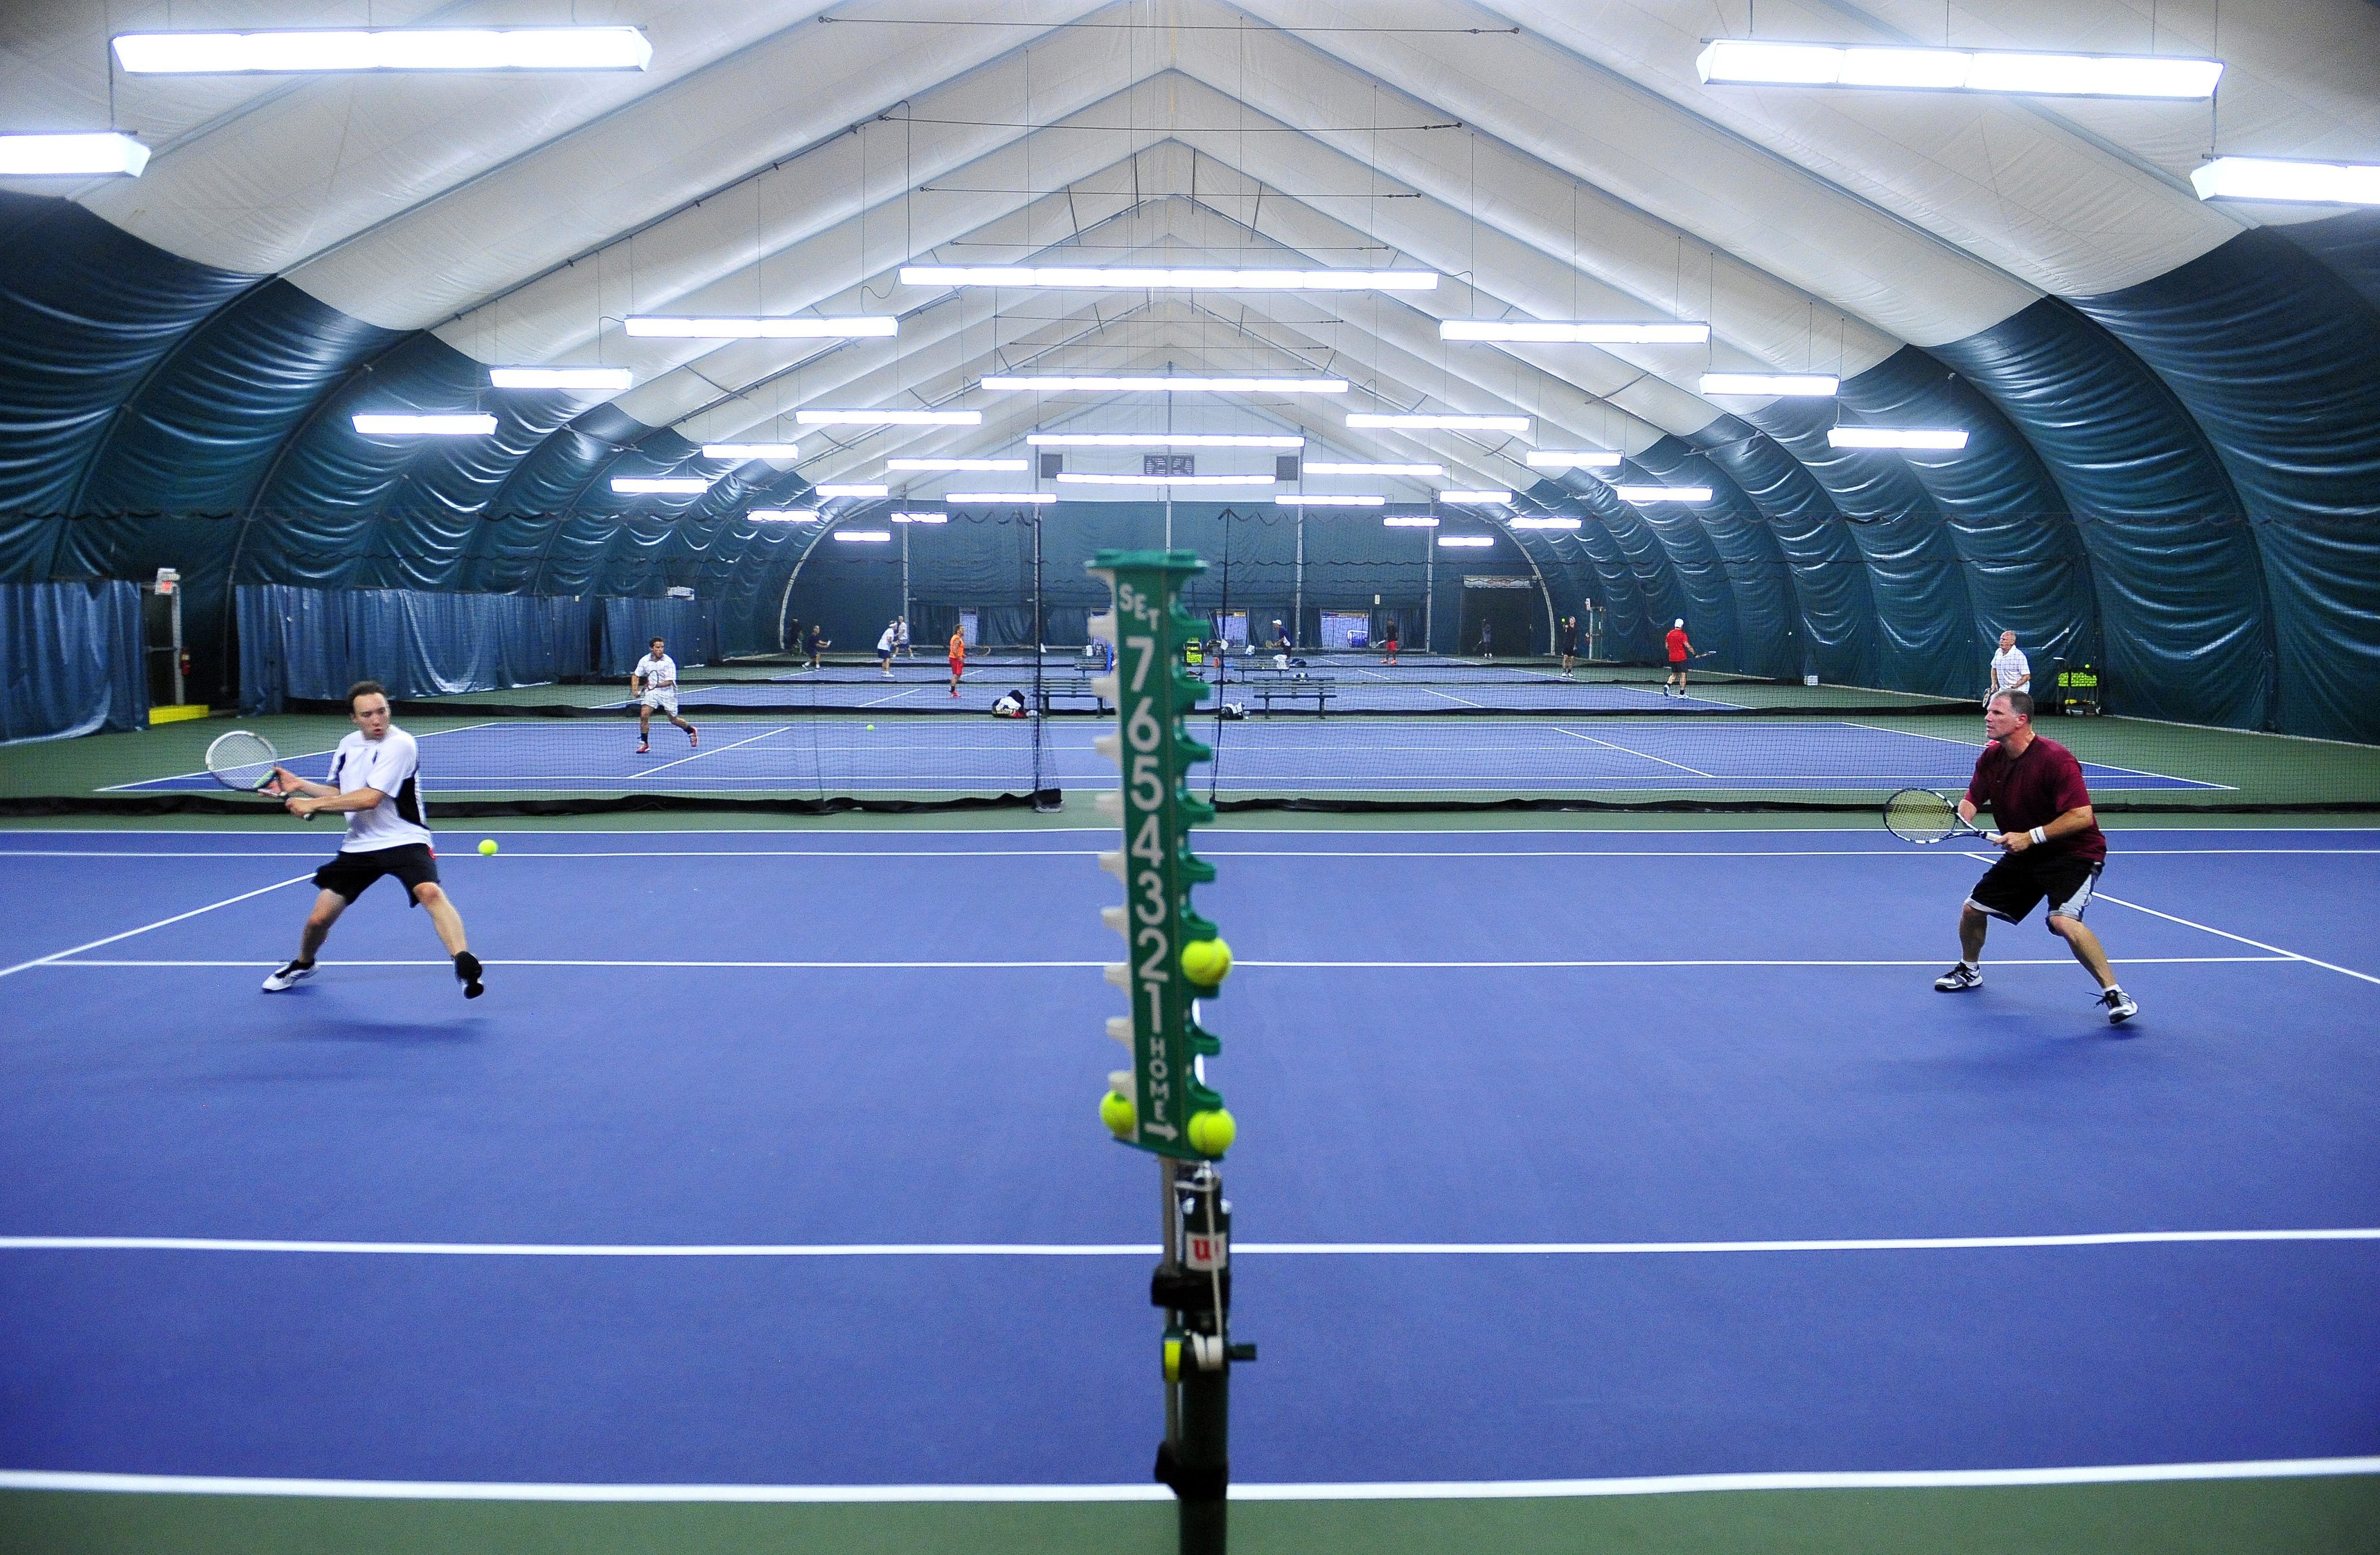 The Tennis Center at The Atlantic Club - Jersey Shore